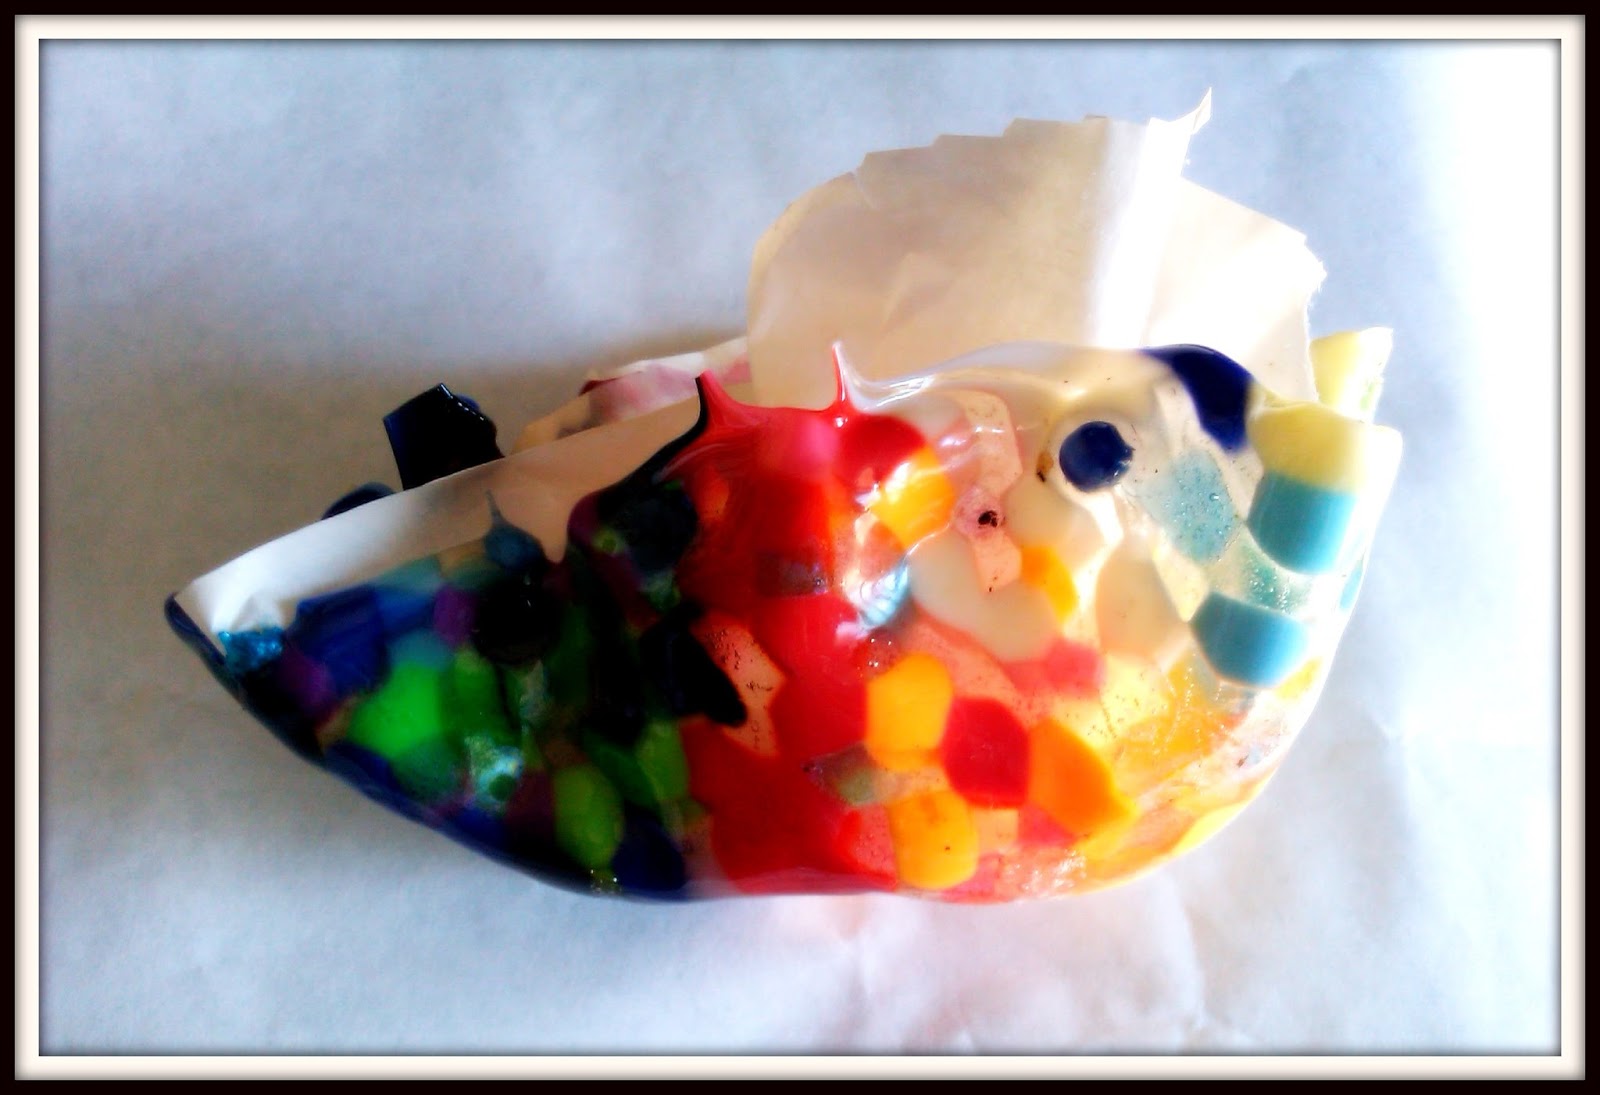 Melted Bead Bowl